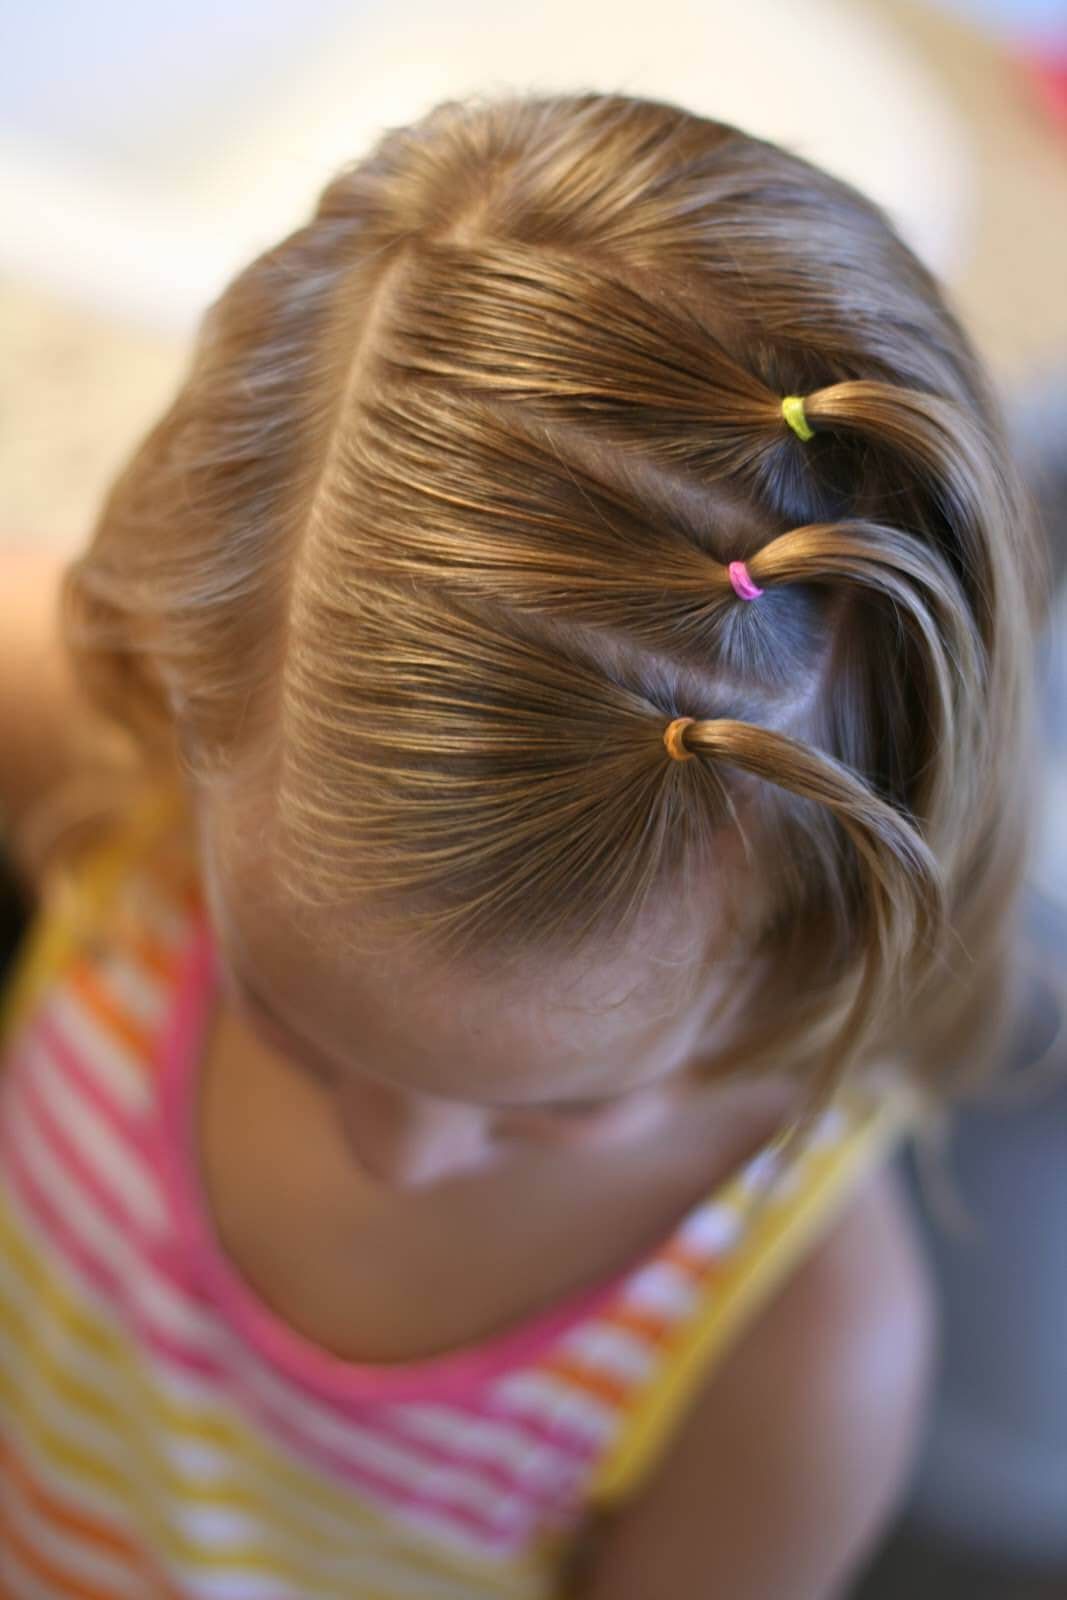 12 Adorable Toddler Girl Hairstyles -   17 little girl hairstyles With Bangs ideas